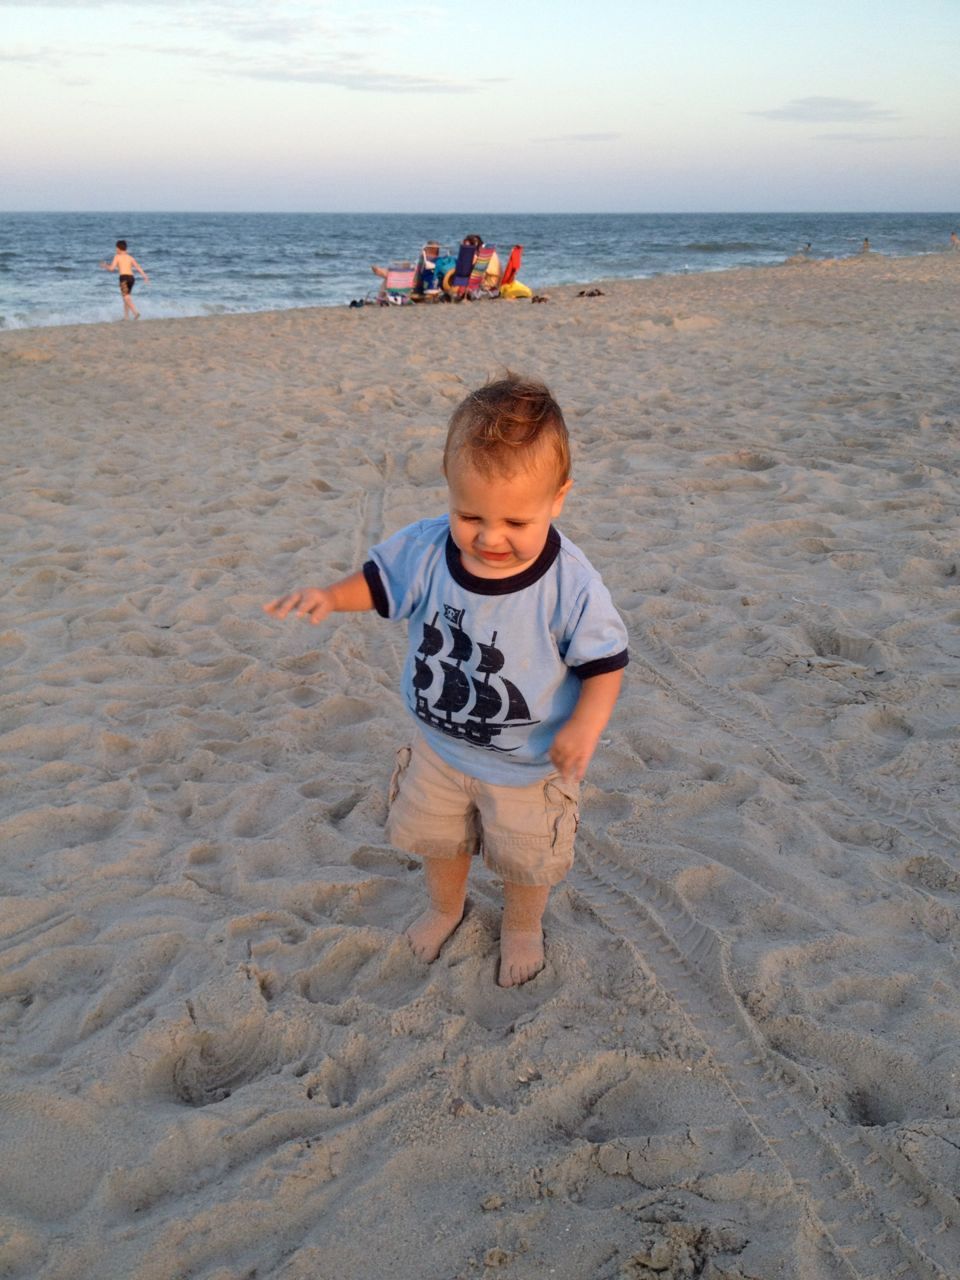  Feeling the sand between his toes. 